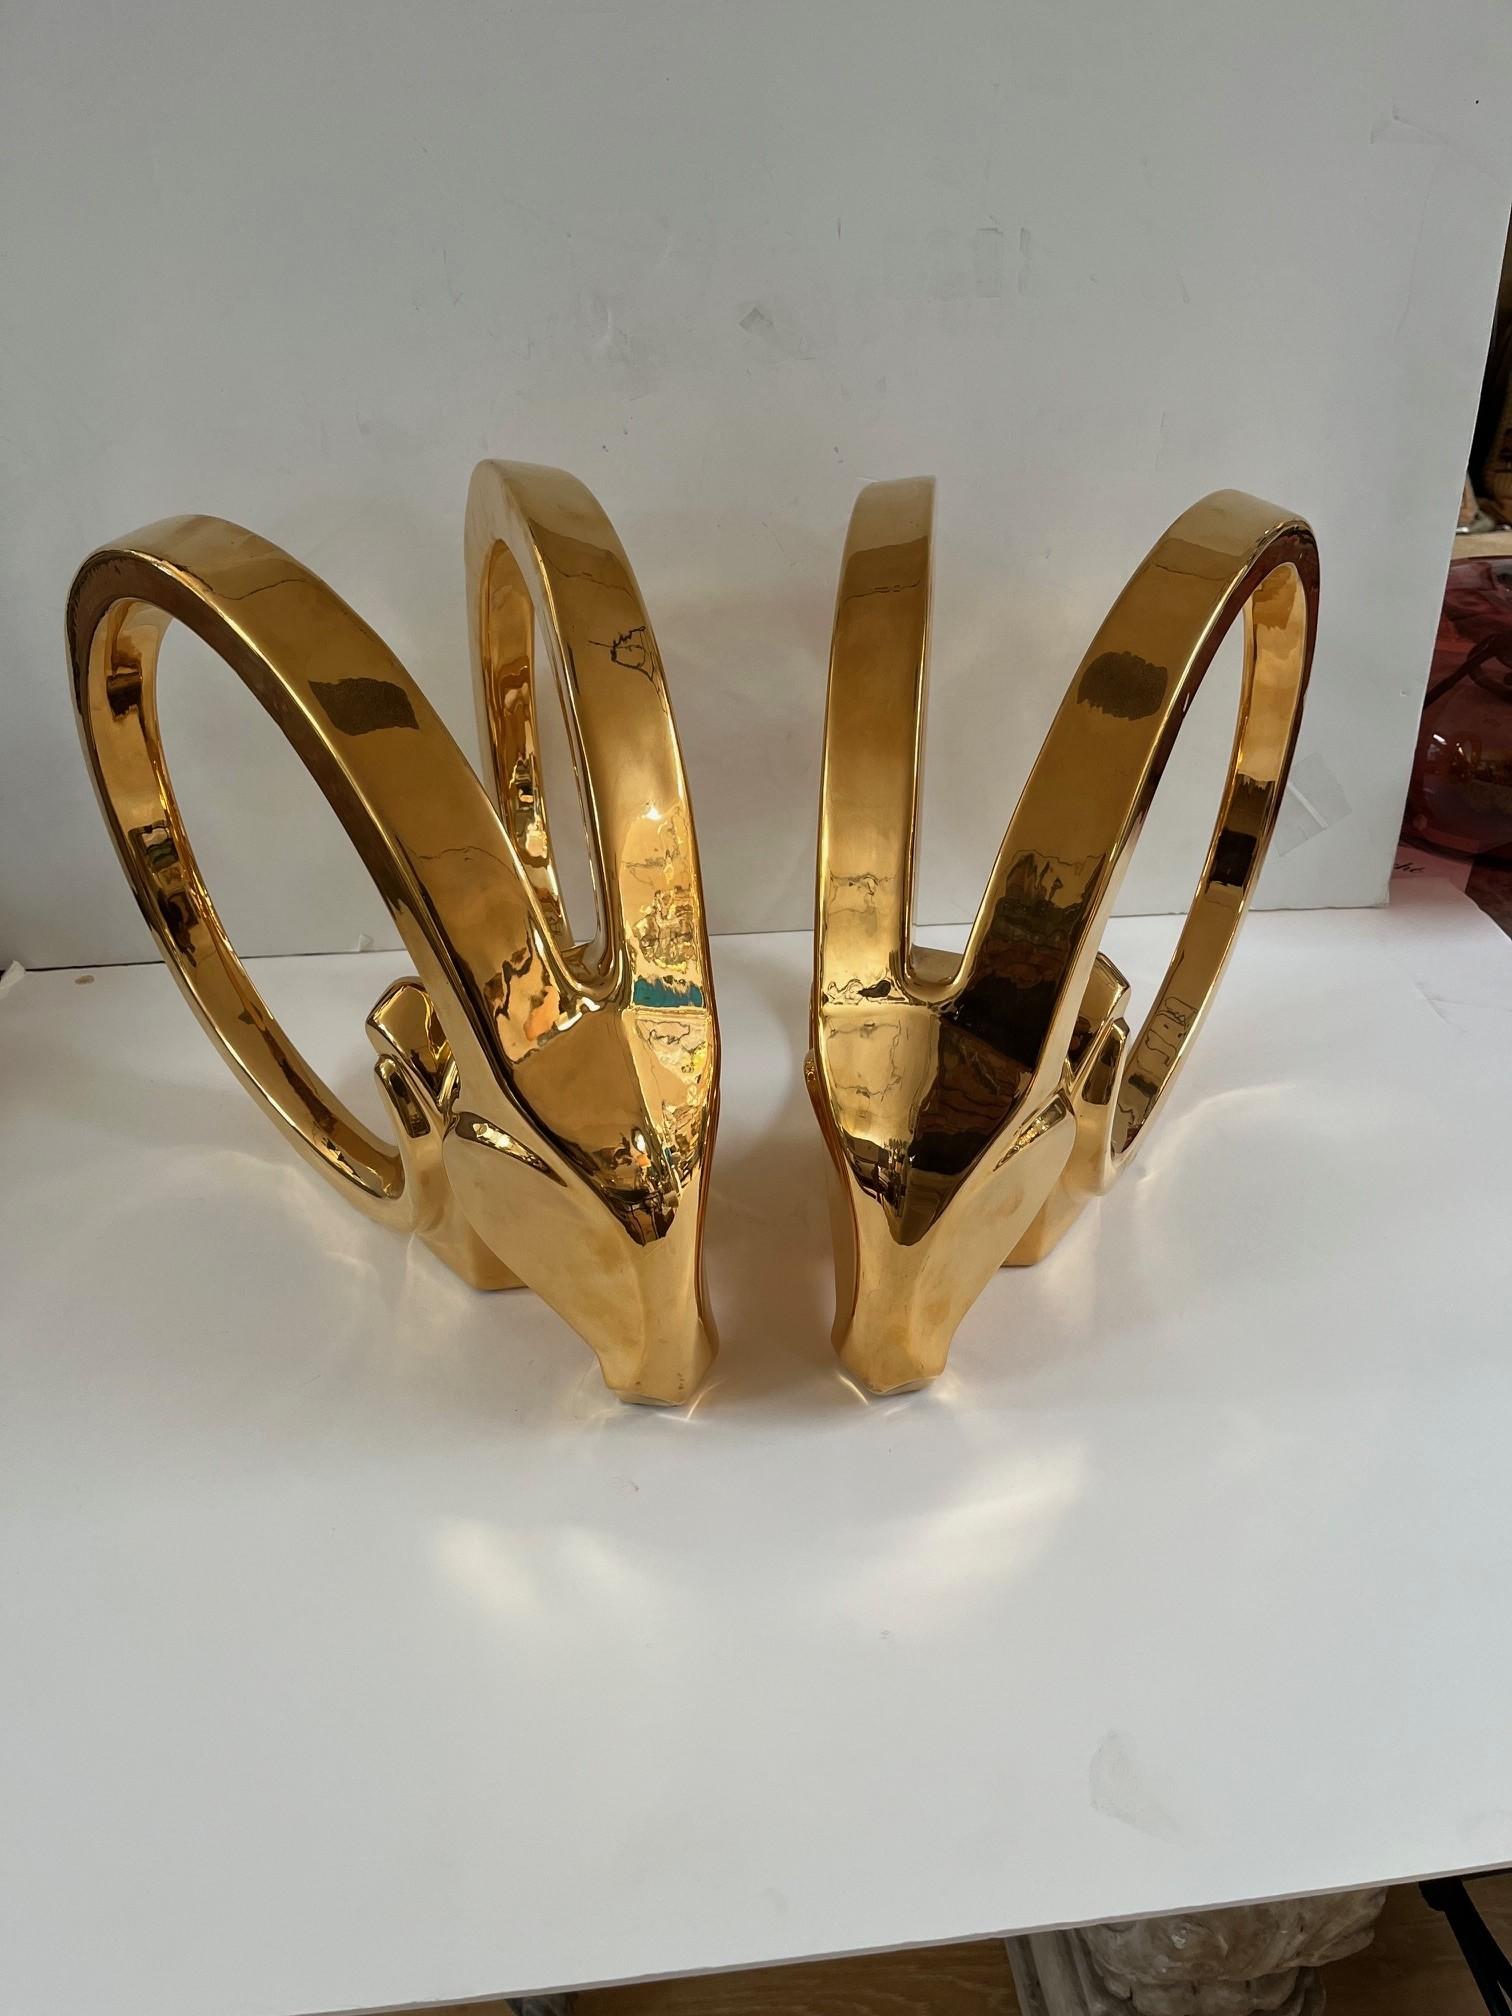 Pair of Vintage Large Solid 18KT Gold Plated Ceramic Rams Head Sculptures, Bookends by Jaru, Hollywood Regency Style